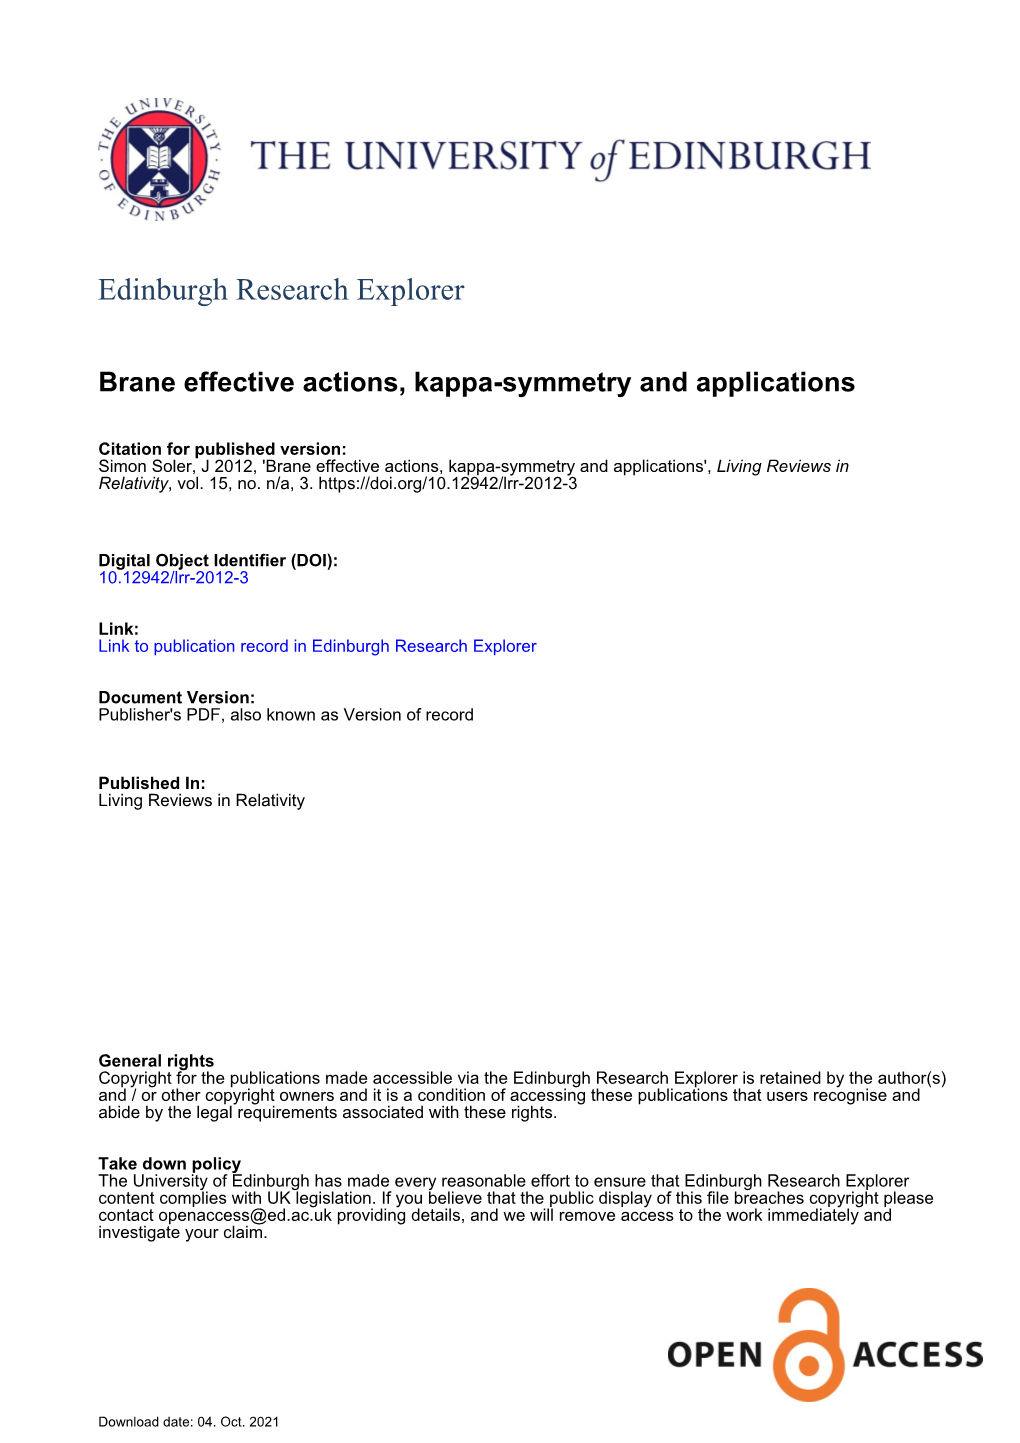 Brane Effective Actions, Kappa-Symmetry and Applications